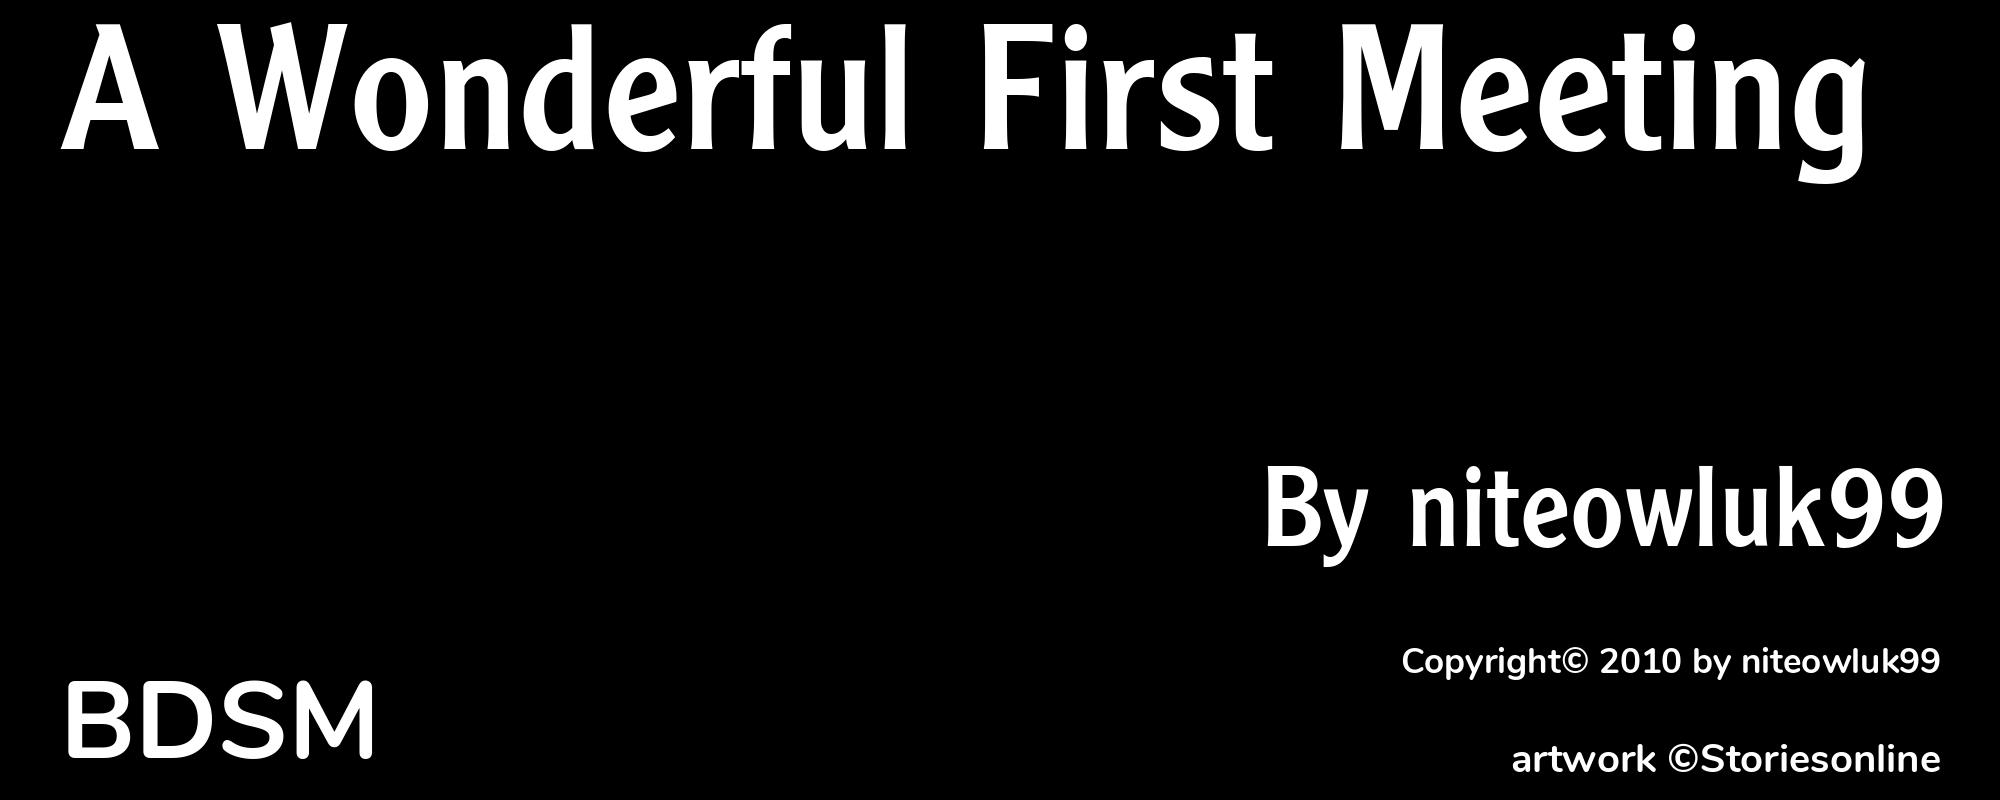 A Wonderful First Meeting - Cover